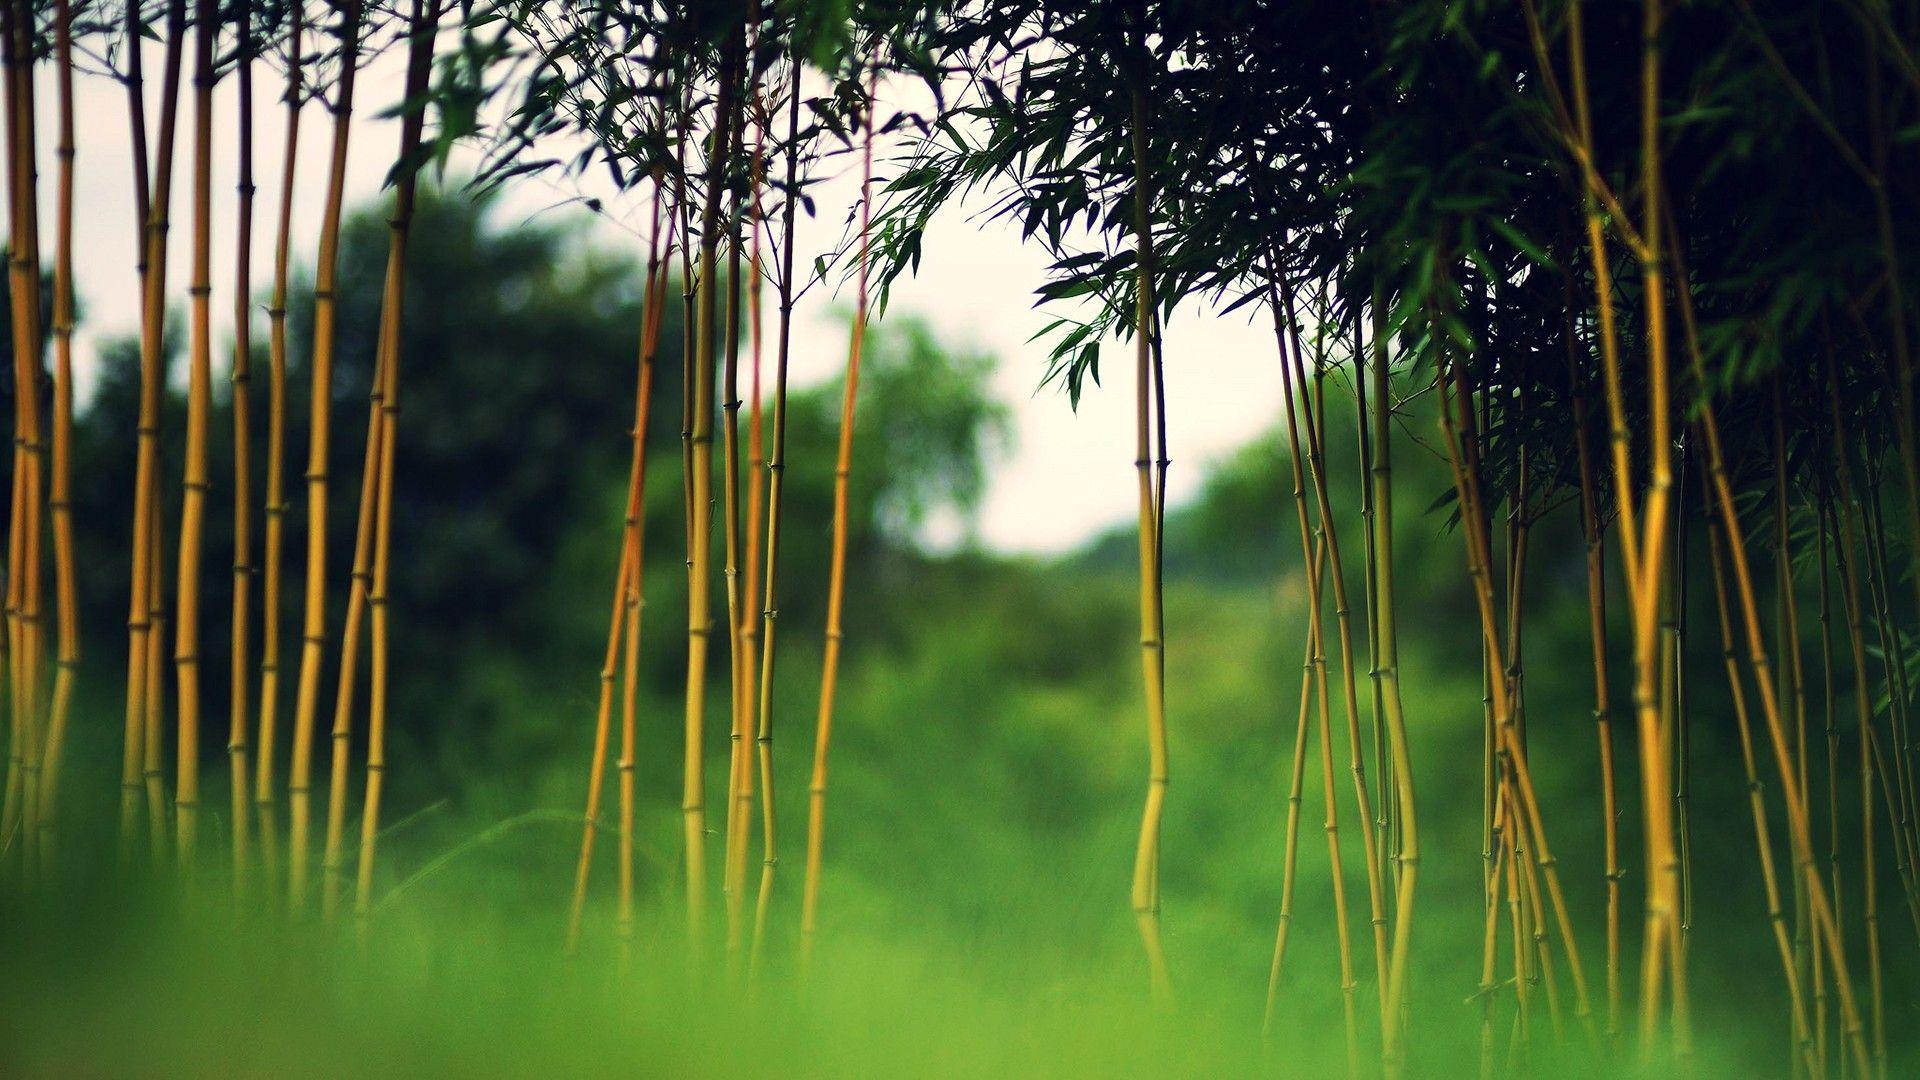 HD Bamboo Tree Nature Top HD Wallpaper For Desktop Background Free